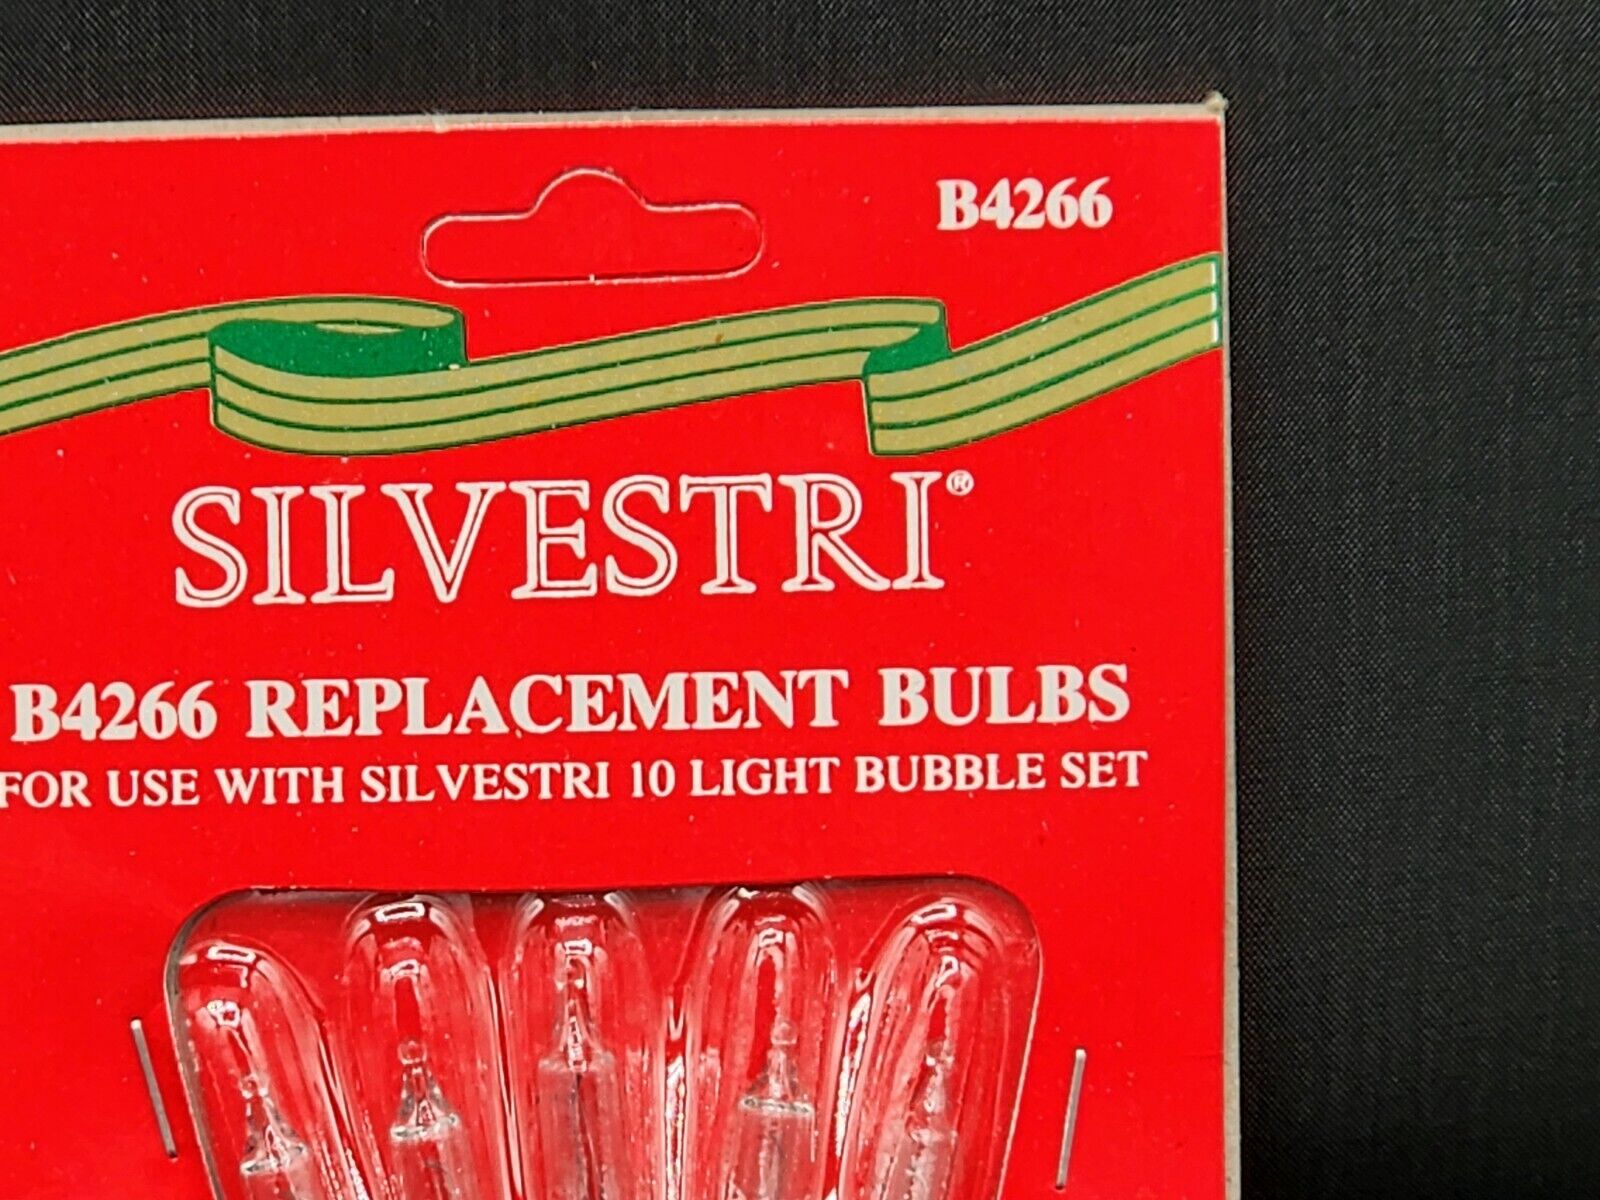 Silvestri Replacement Bulbs Set of 10 B4266 - 12V - New - Ballast - For Bubble 